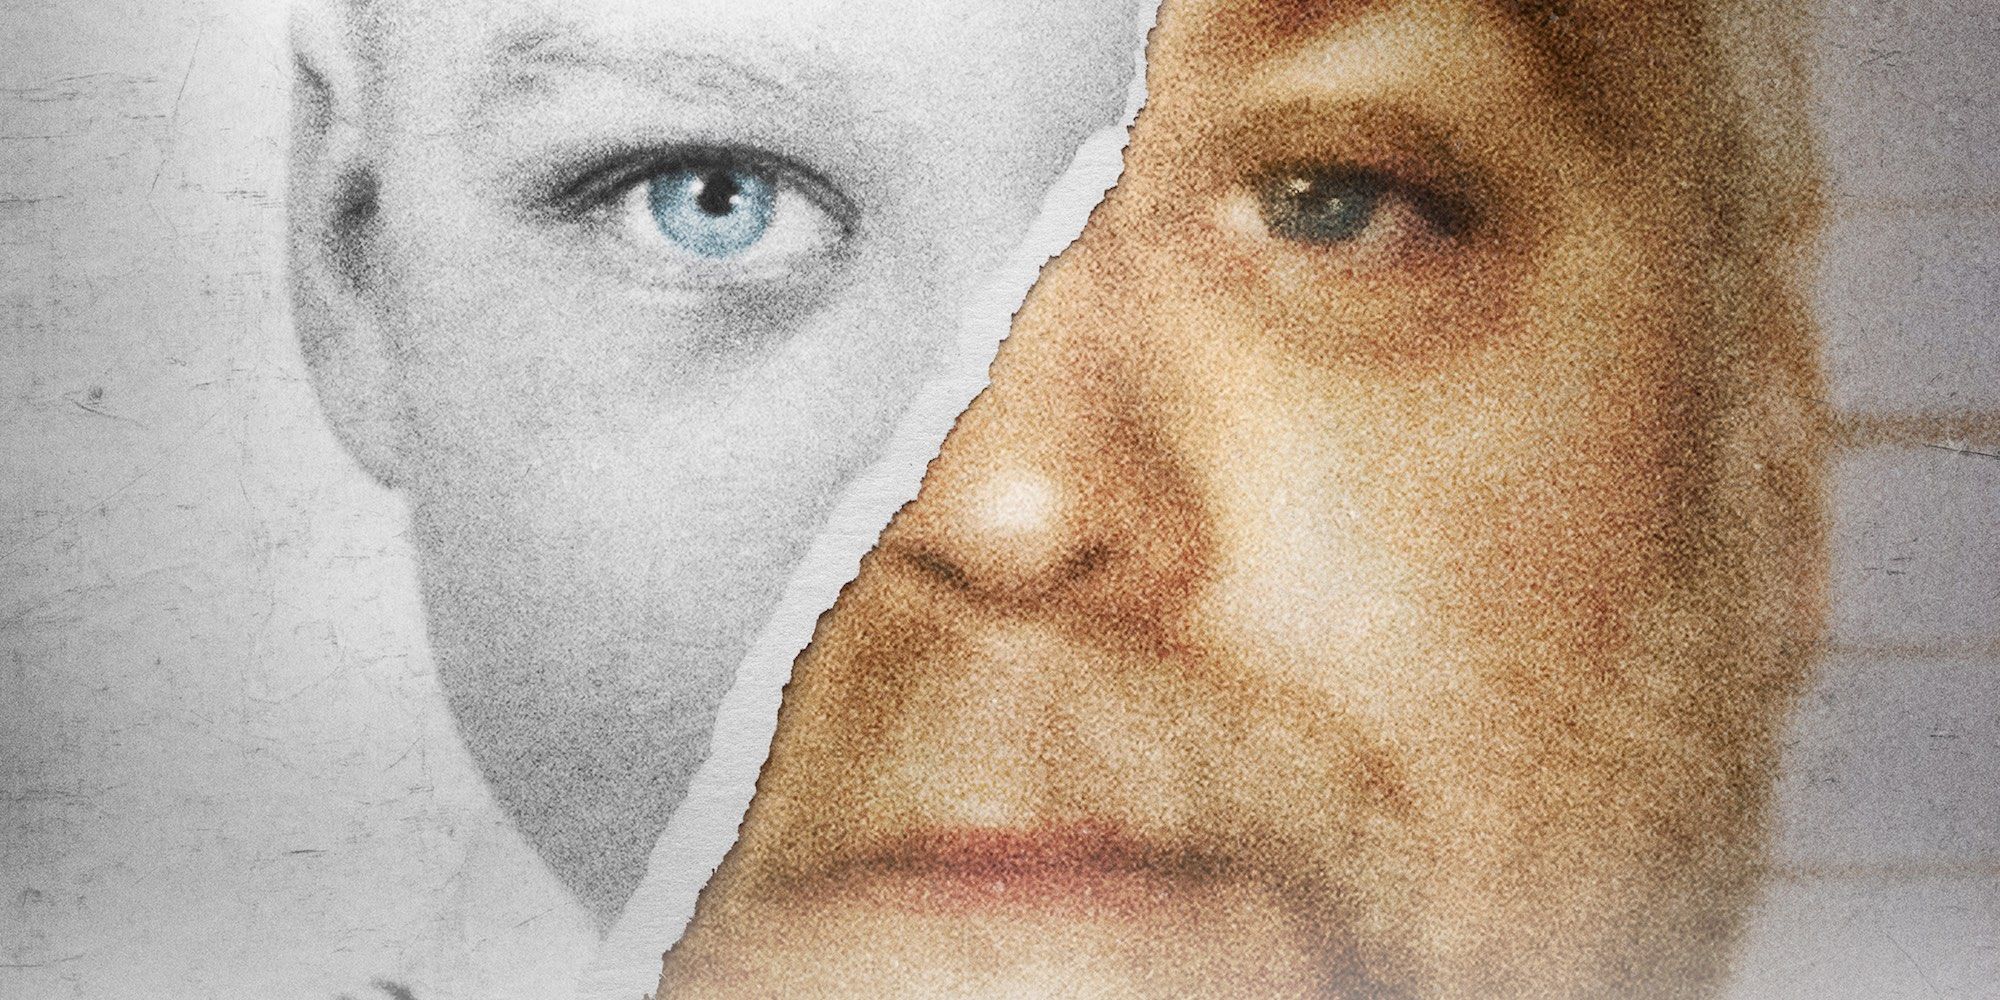 The Making A Murderer Poster cropped